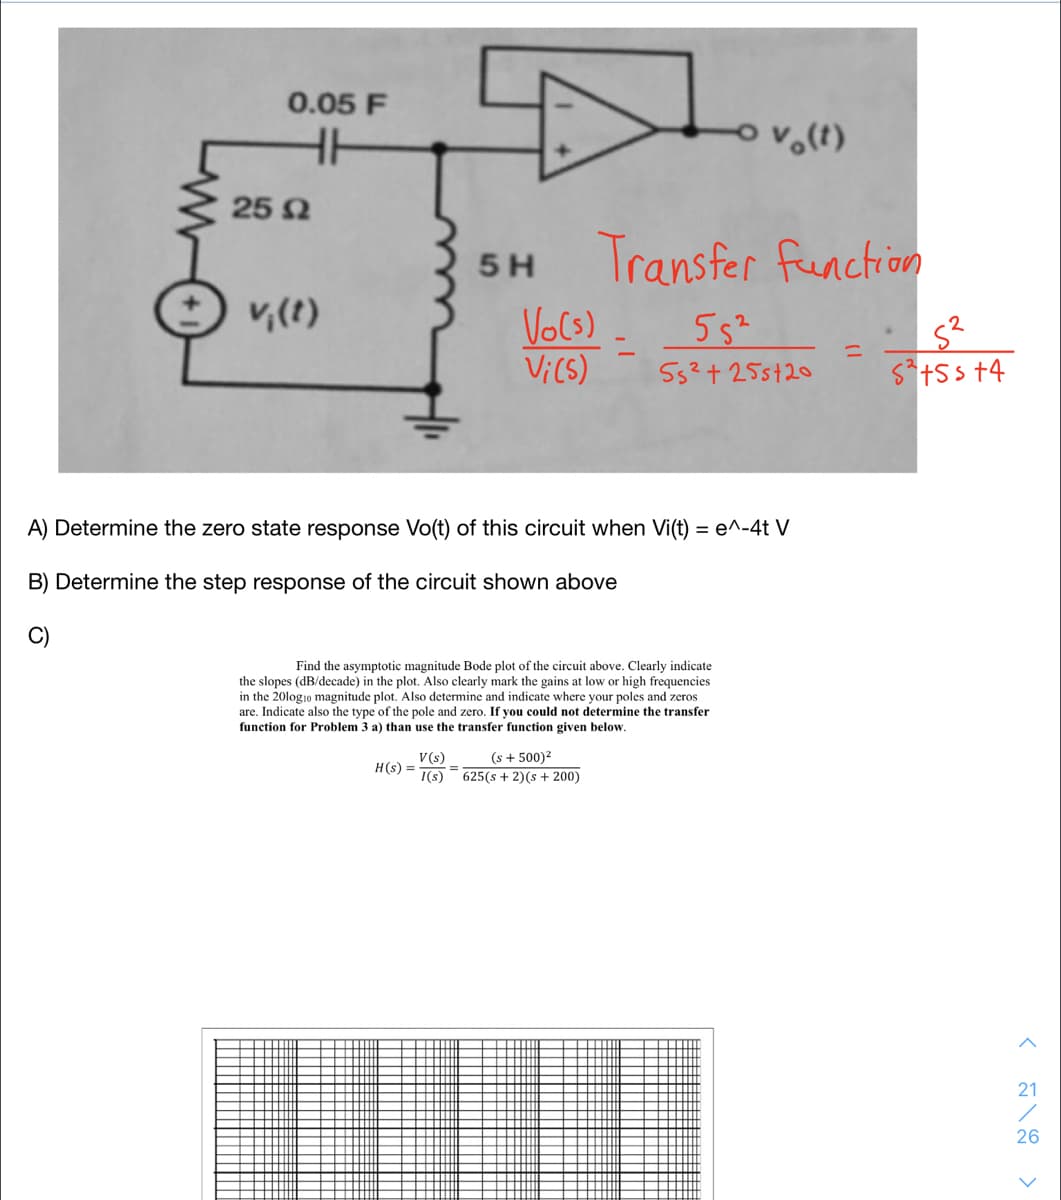 0.05 F
25 2
Transfer function
5H
v,(t)
VoCs)
Vi(S)
55²
55²+25st20
S*+5 s +4
A) Determine the zero state response Vo(t) of this circuit when Vi(t) = e^-4t V
B) Determine the step response of the circuit shown above
Find the asymptotic magnitude Bode plot of the circuit above. Clearly indicate
the slopes (dB/decade) in the plot. Also clearly mark the gains at low or high frequencies
in the 20log1o magnitude plot. Also determine and indicate where your poles and zeros
are. Indicate also the type of the pole and zero. If you could not determine the transfer
function for Problem 3 a) than use the transfer function given below.
V(s)
H(s) =
I(s)
(s + 500)2
625(s + 2)(s + 200)
%3D
21
26
